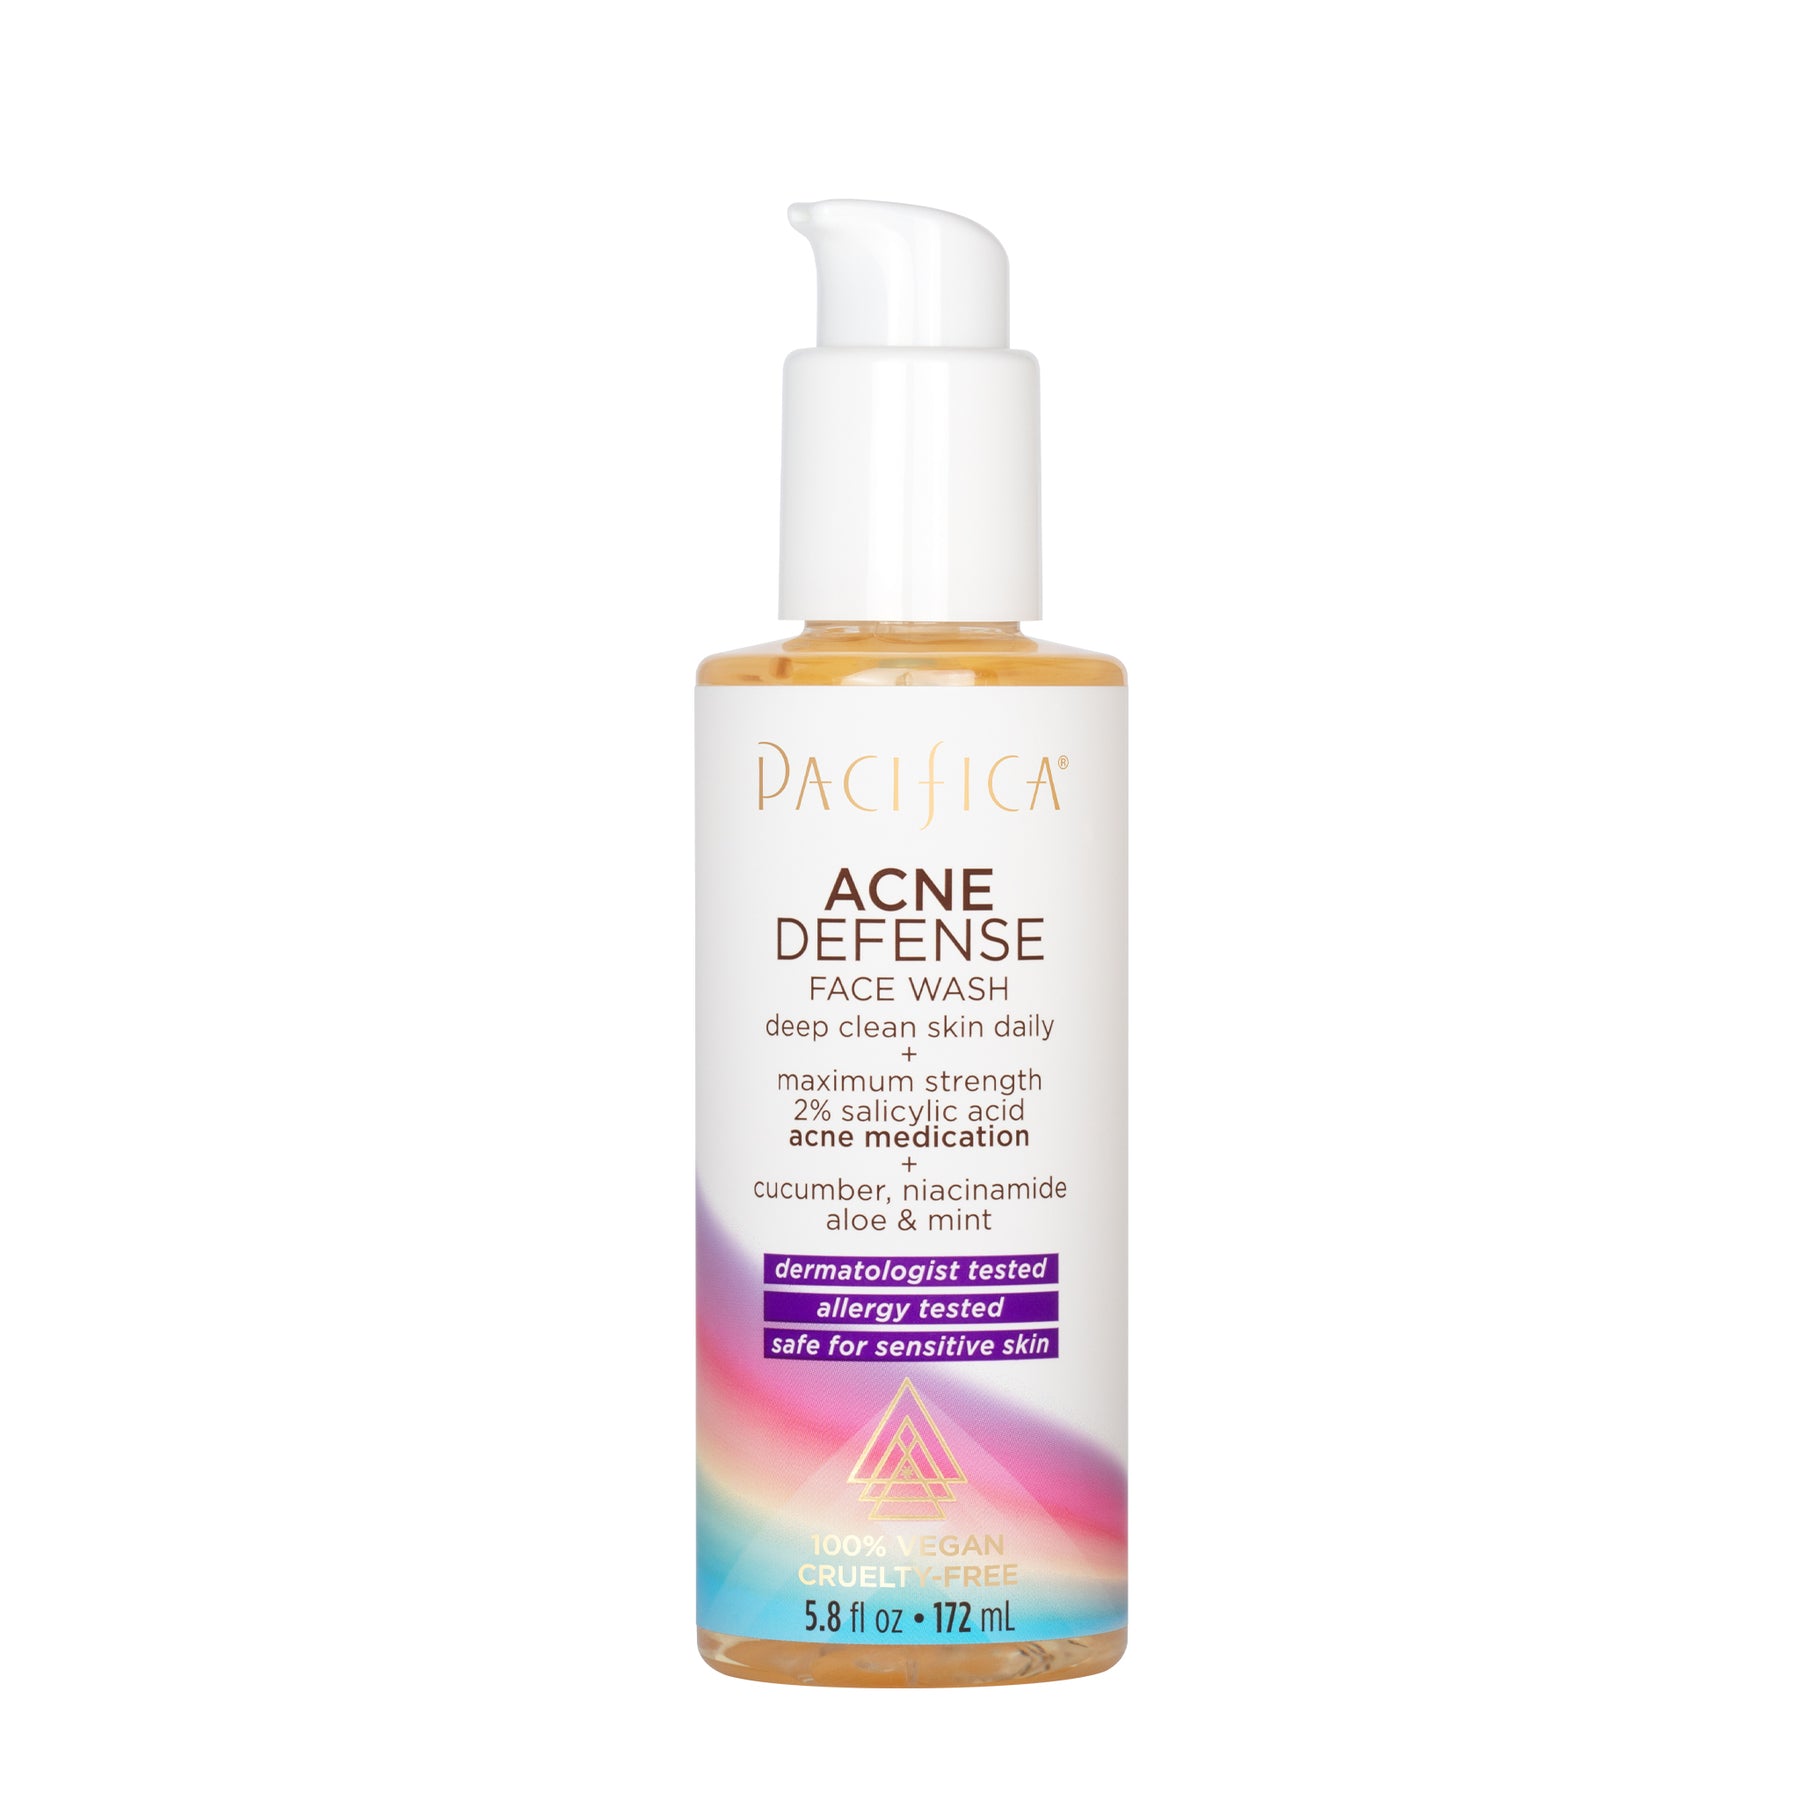 Acne Defense Face Wash - Skin Care - Pacifica Beauty